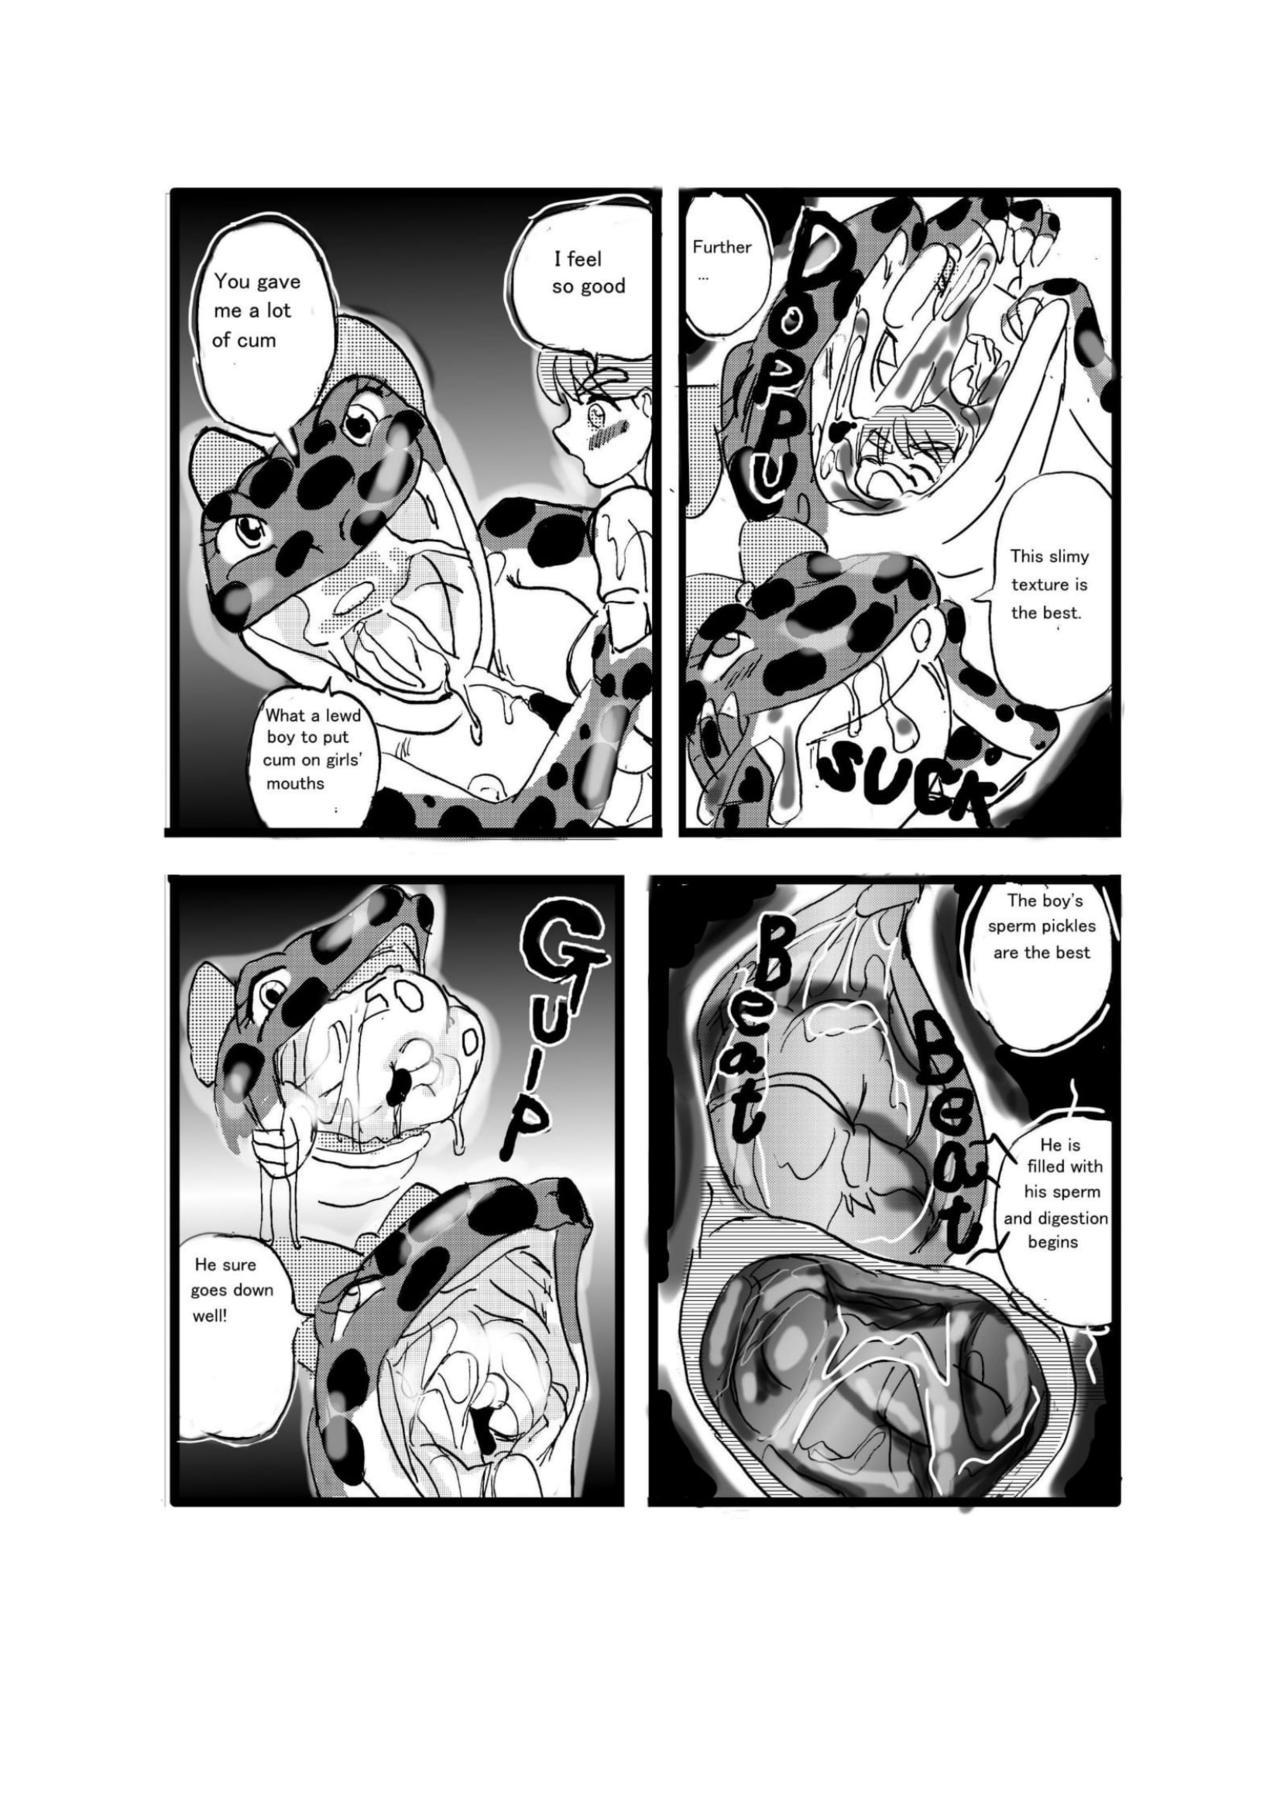 Lesbian Porn Swallowed Whole vol.2 Waniko + What's Digestion? - Original Footfetish - Page 8